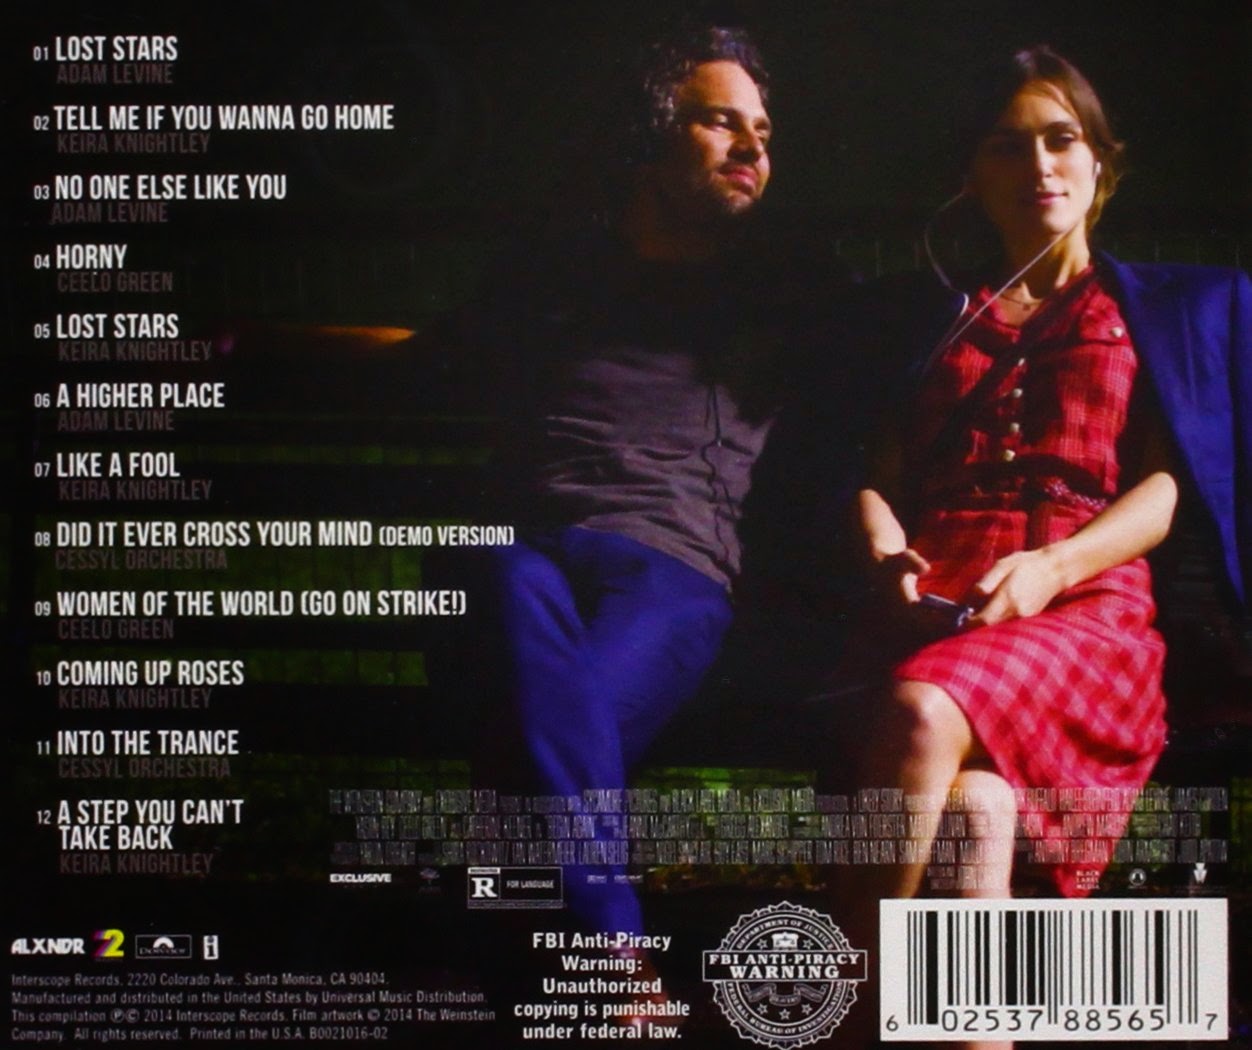 can a song save your life soundtracks-begin again soundtracks